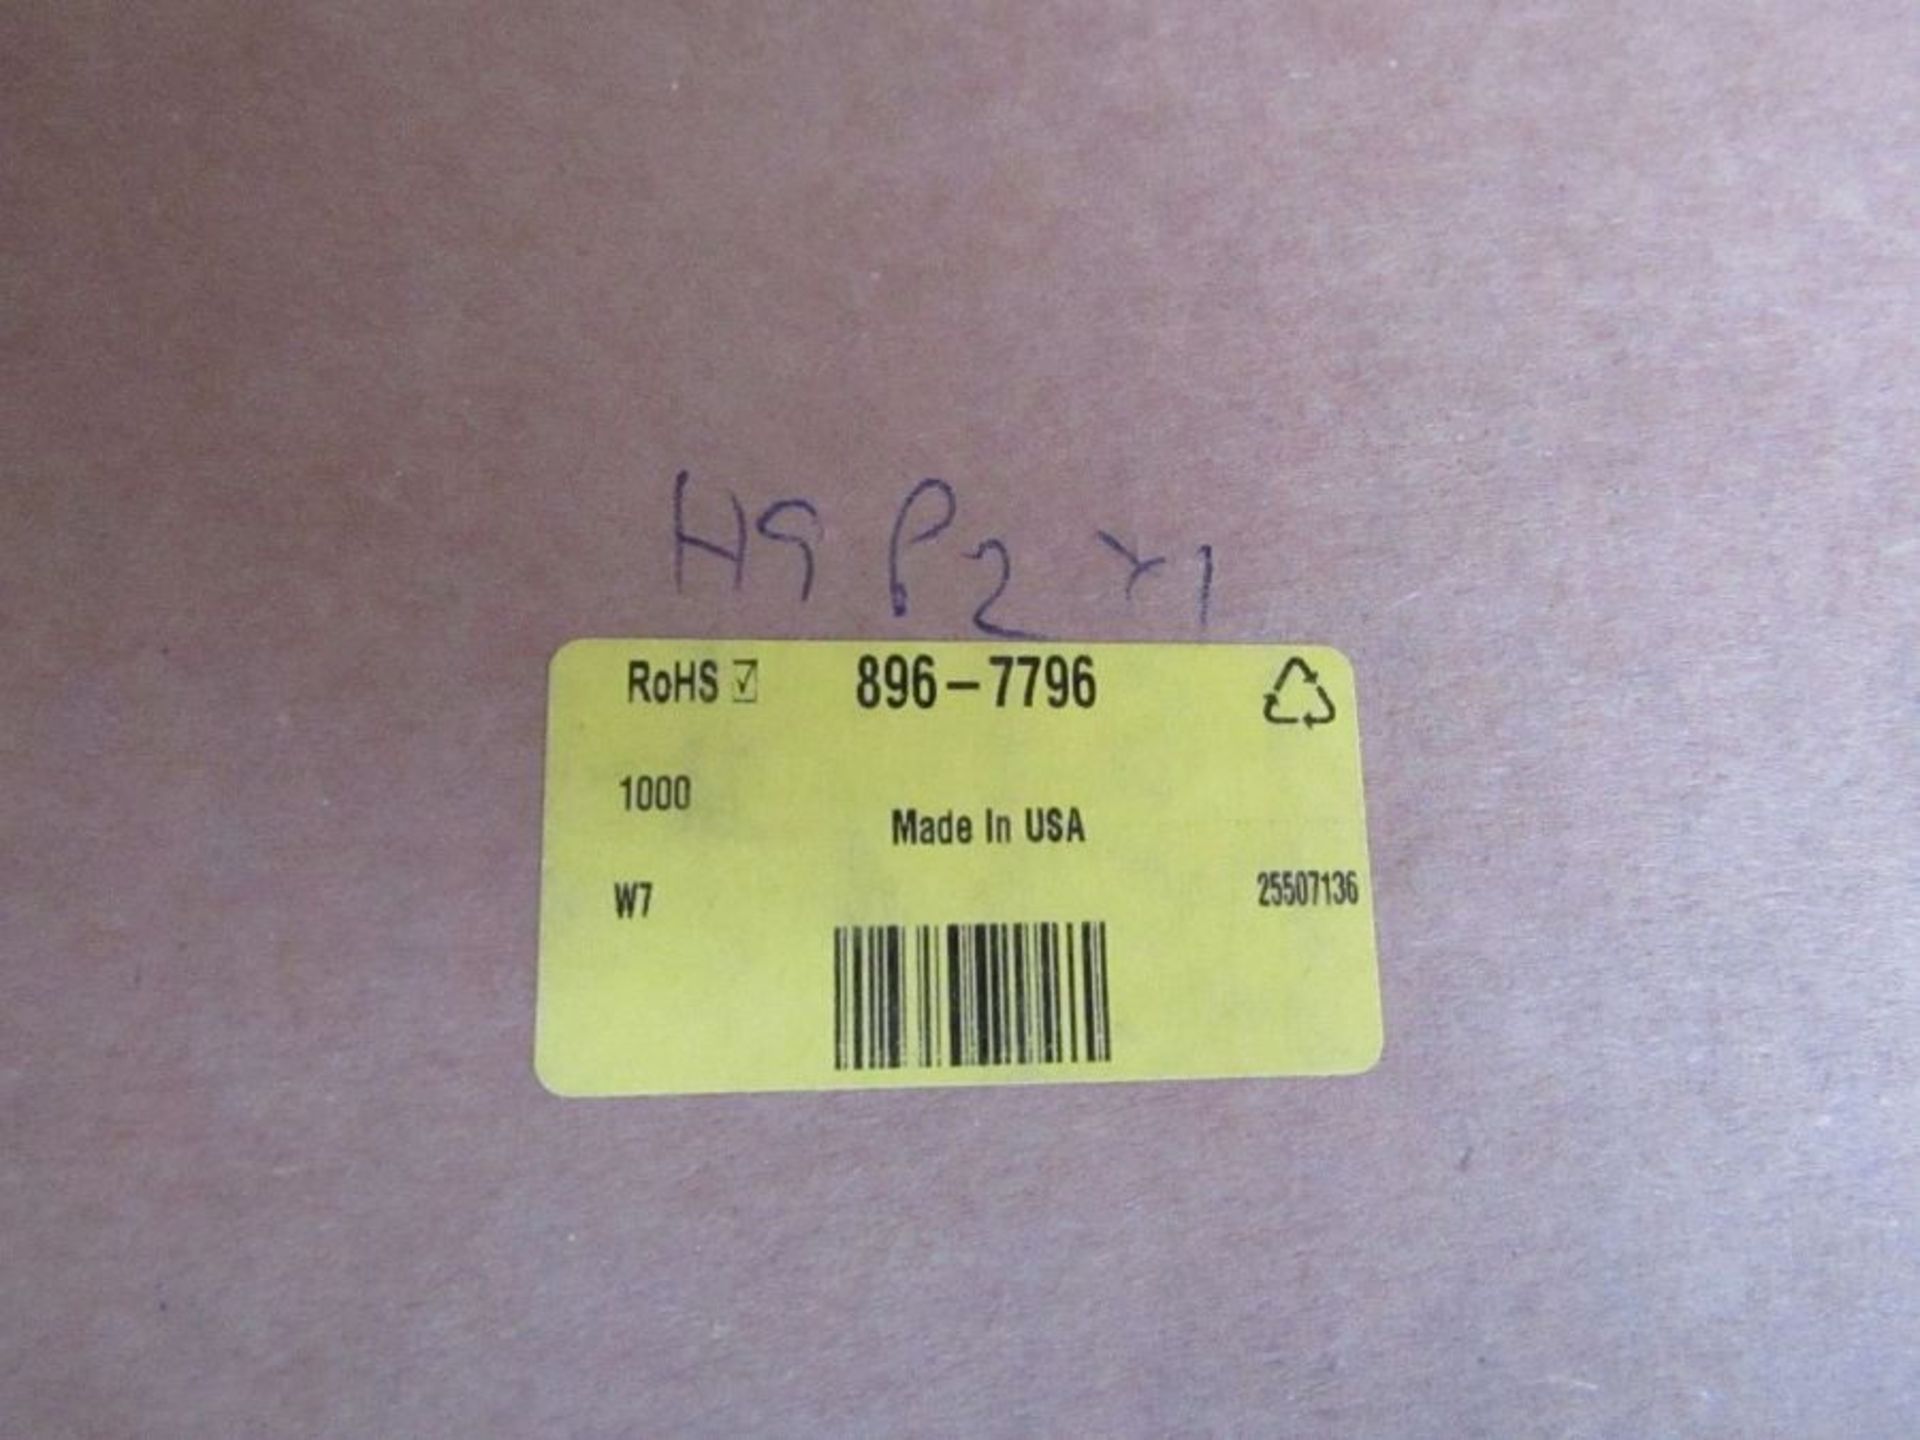 Box of 1000 TE Connectivity D-SCE Heat Shrink Cable Marker Yellow 1005fc 8967796 - Image 6 of 6